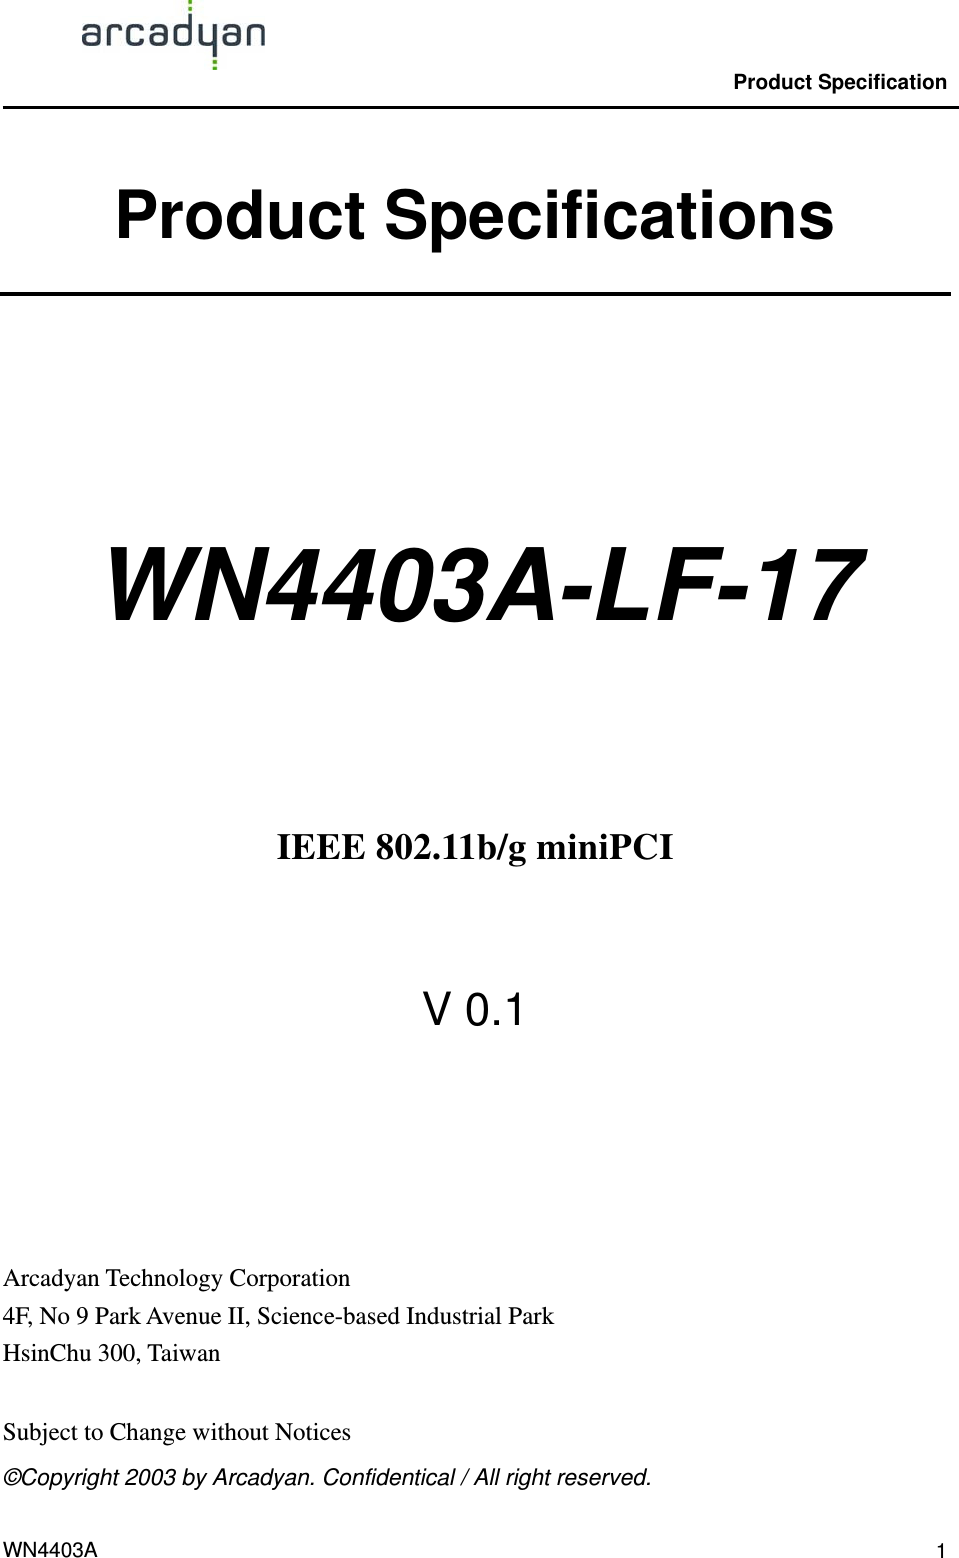                                                Product Specification                                              WN4403A  1Product Specifications   WN4403A-LF-17     IEEE 802.11b/g miniPCI  V 0.1     Arcadyan Technology Corporation 4F, No 9 Park Avenue II, Science-based Industrial Park HsinChu 300, Taiwan  Subject to Change without Notices ©Copyright 2003 by Arcadyan. Confidentical / All right reserved. 